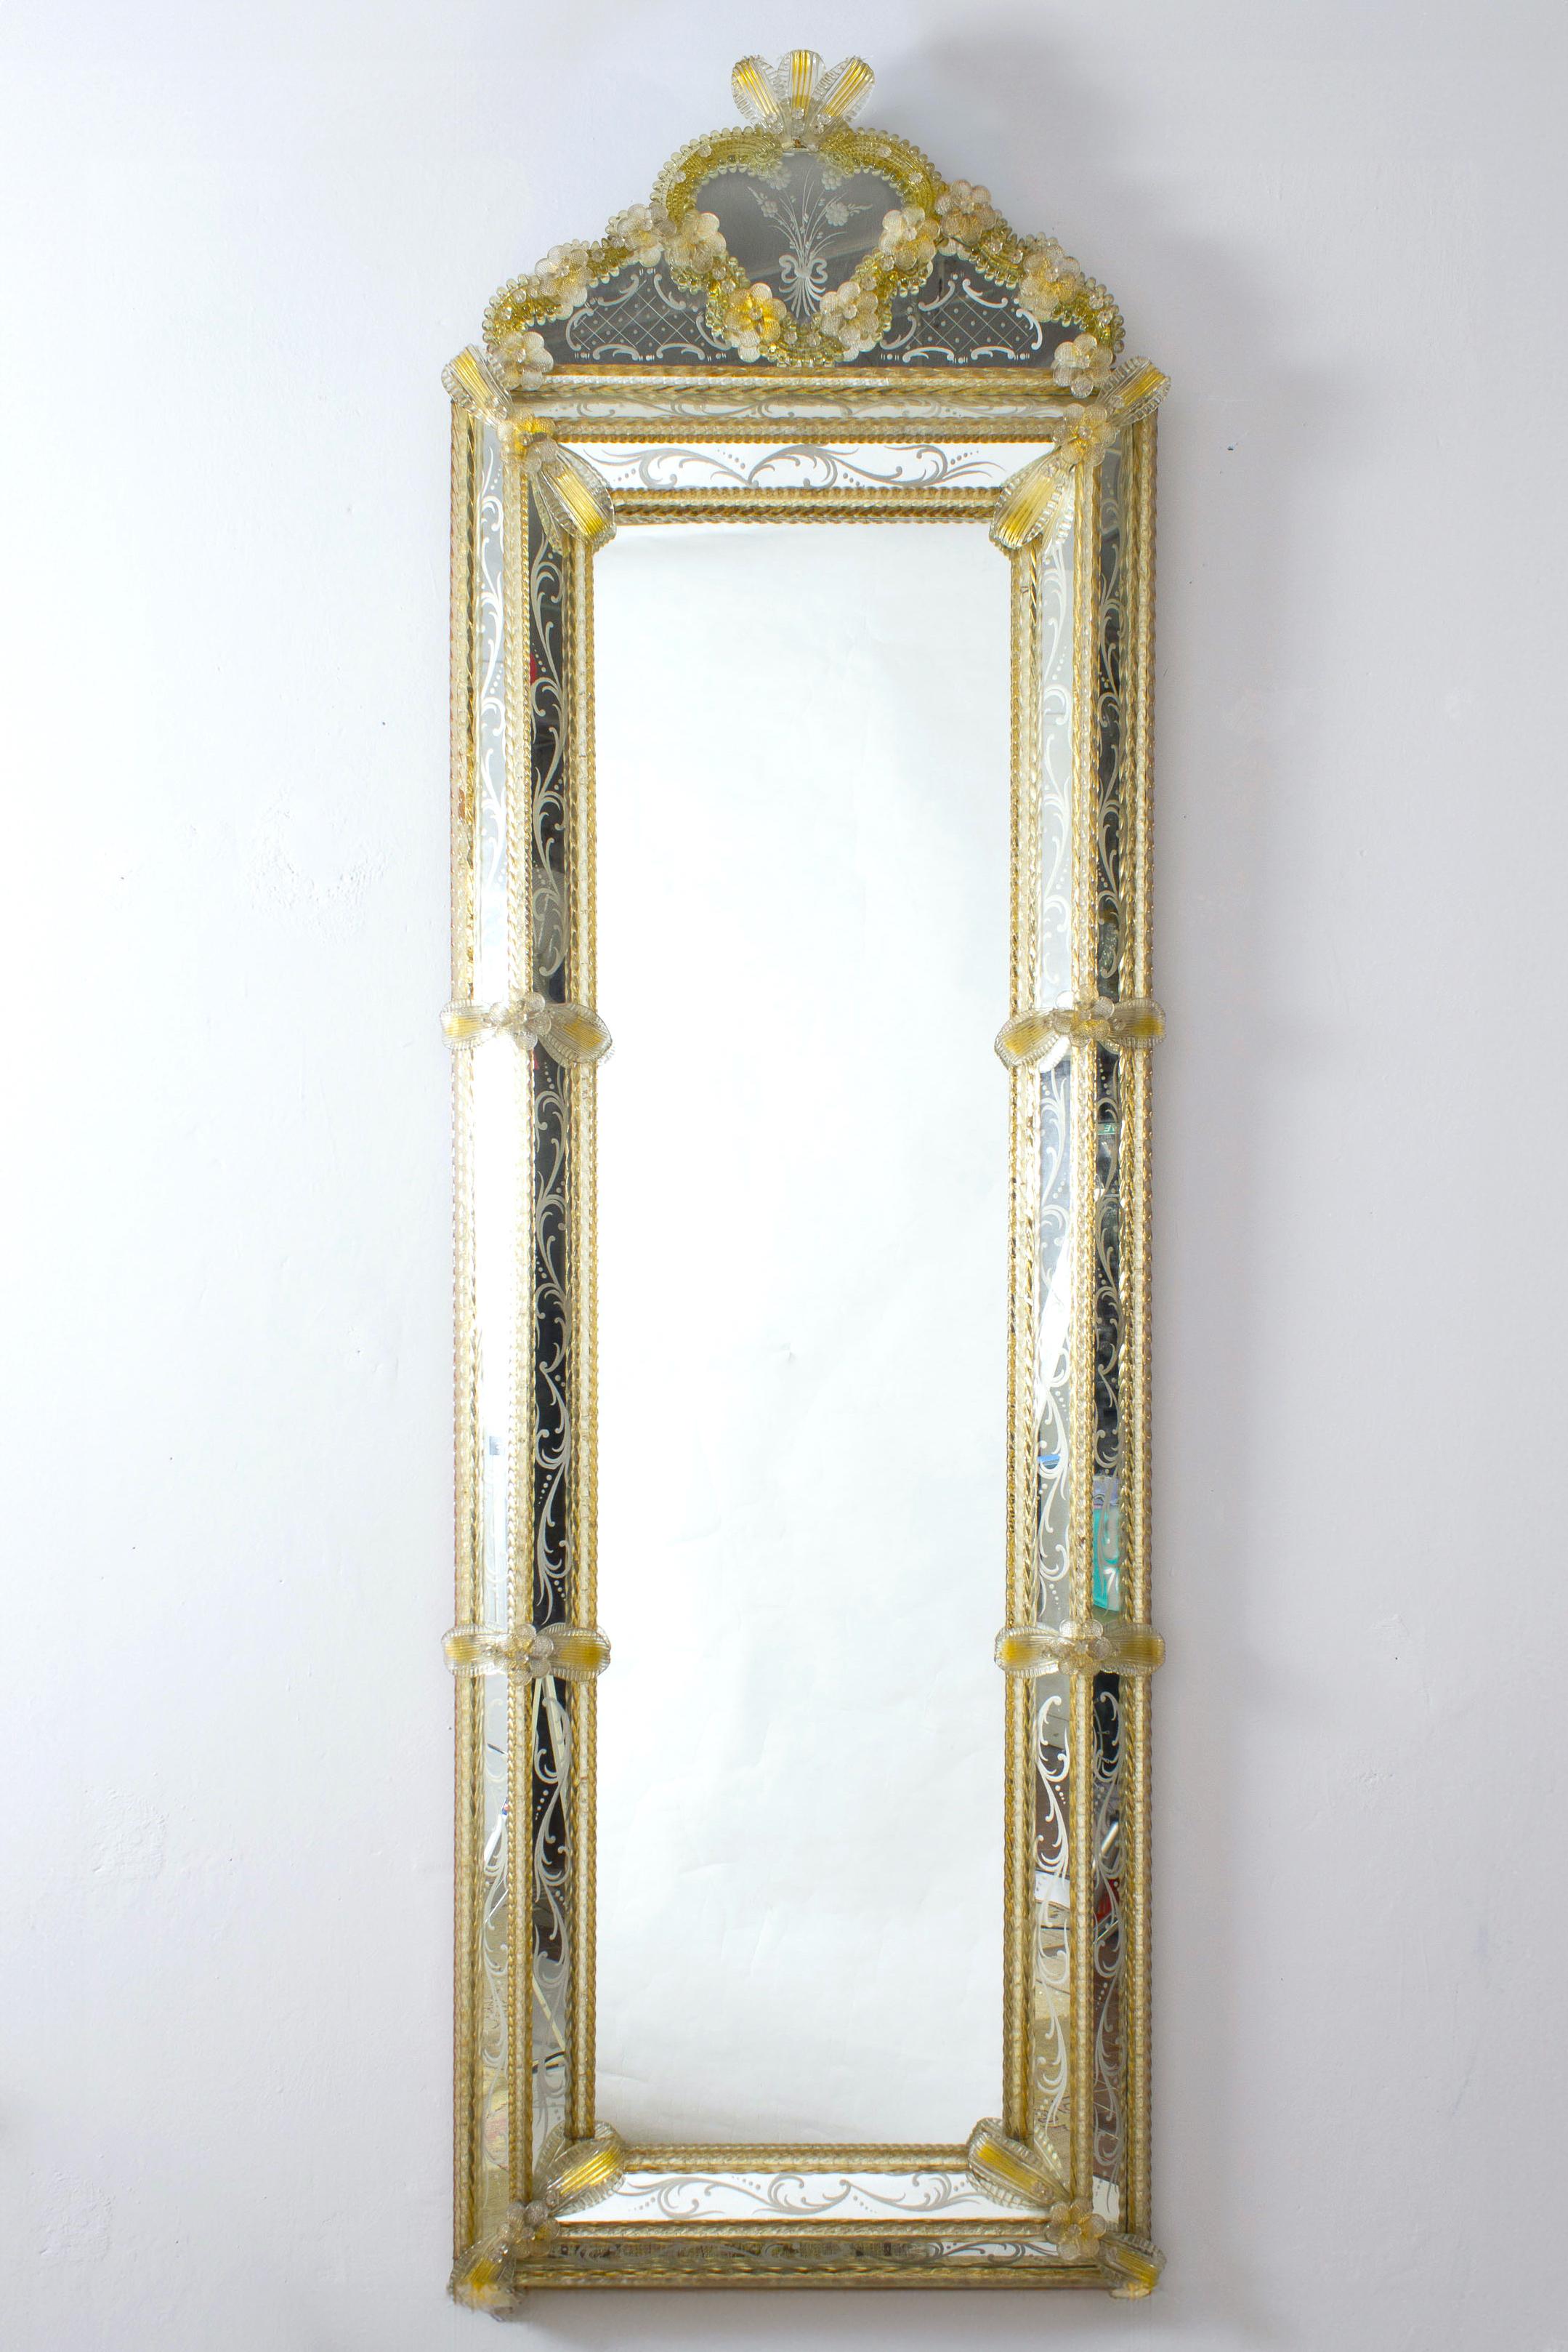 This beautiful Venetian mirror features etched floral motifs adorning the mirrored frame. Along the edges of the frame are gold glass rope accents and numerous glass flowers. 
Excellent vintage condition.